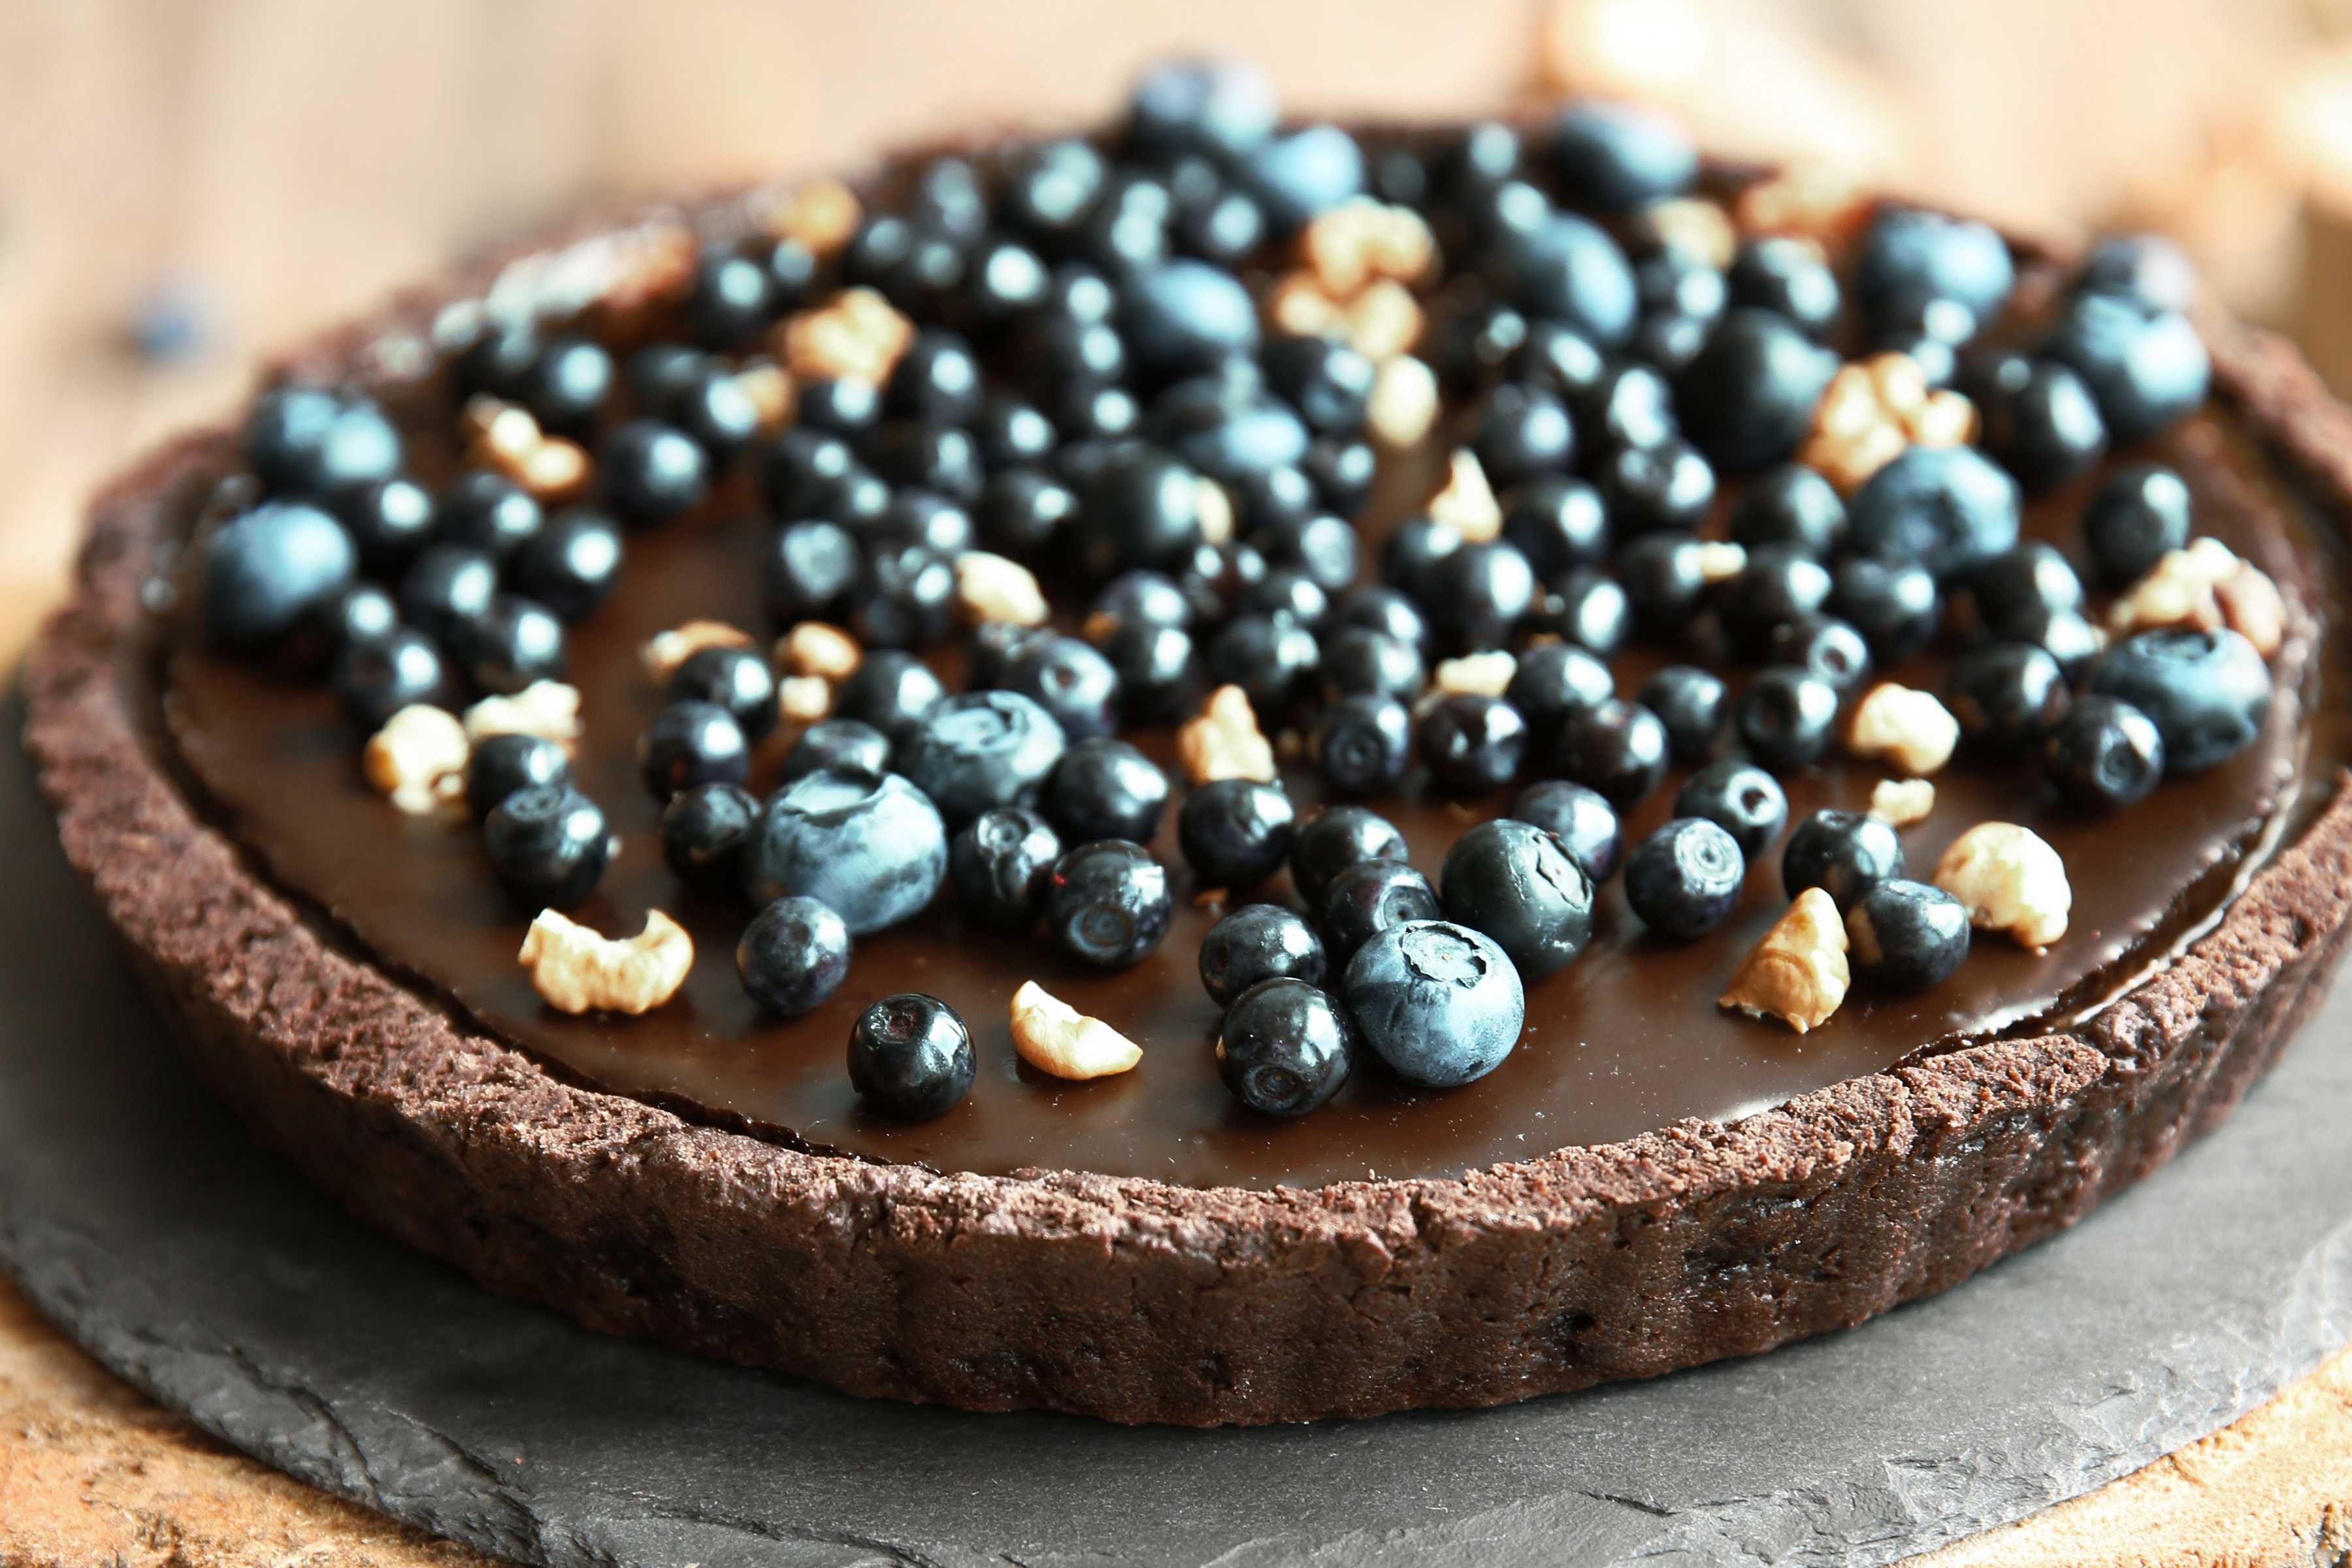 Chocolate tart topped with blueberries.